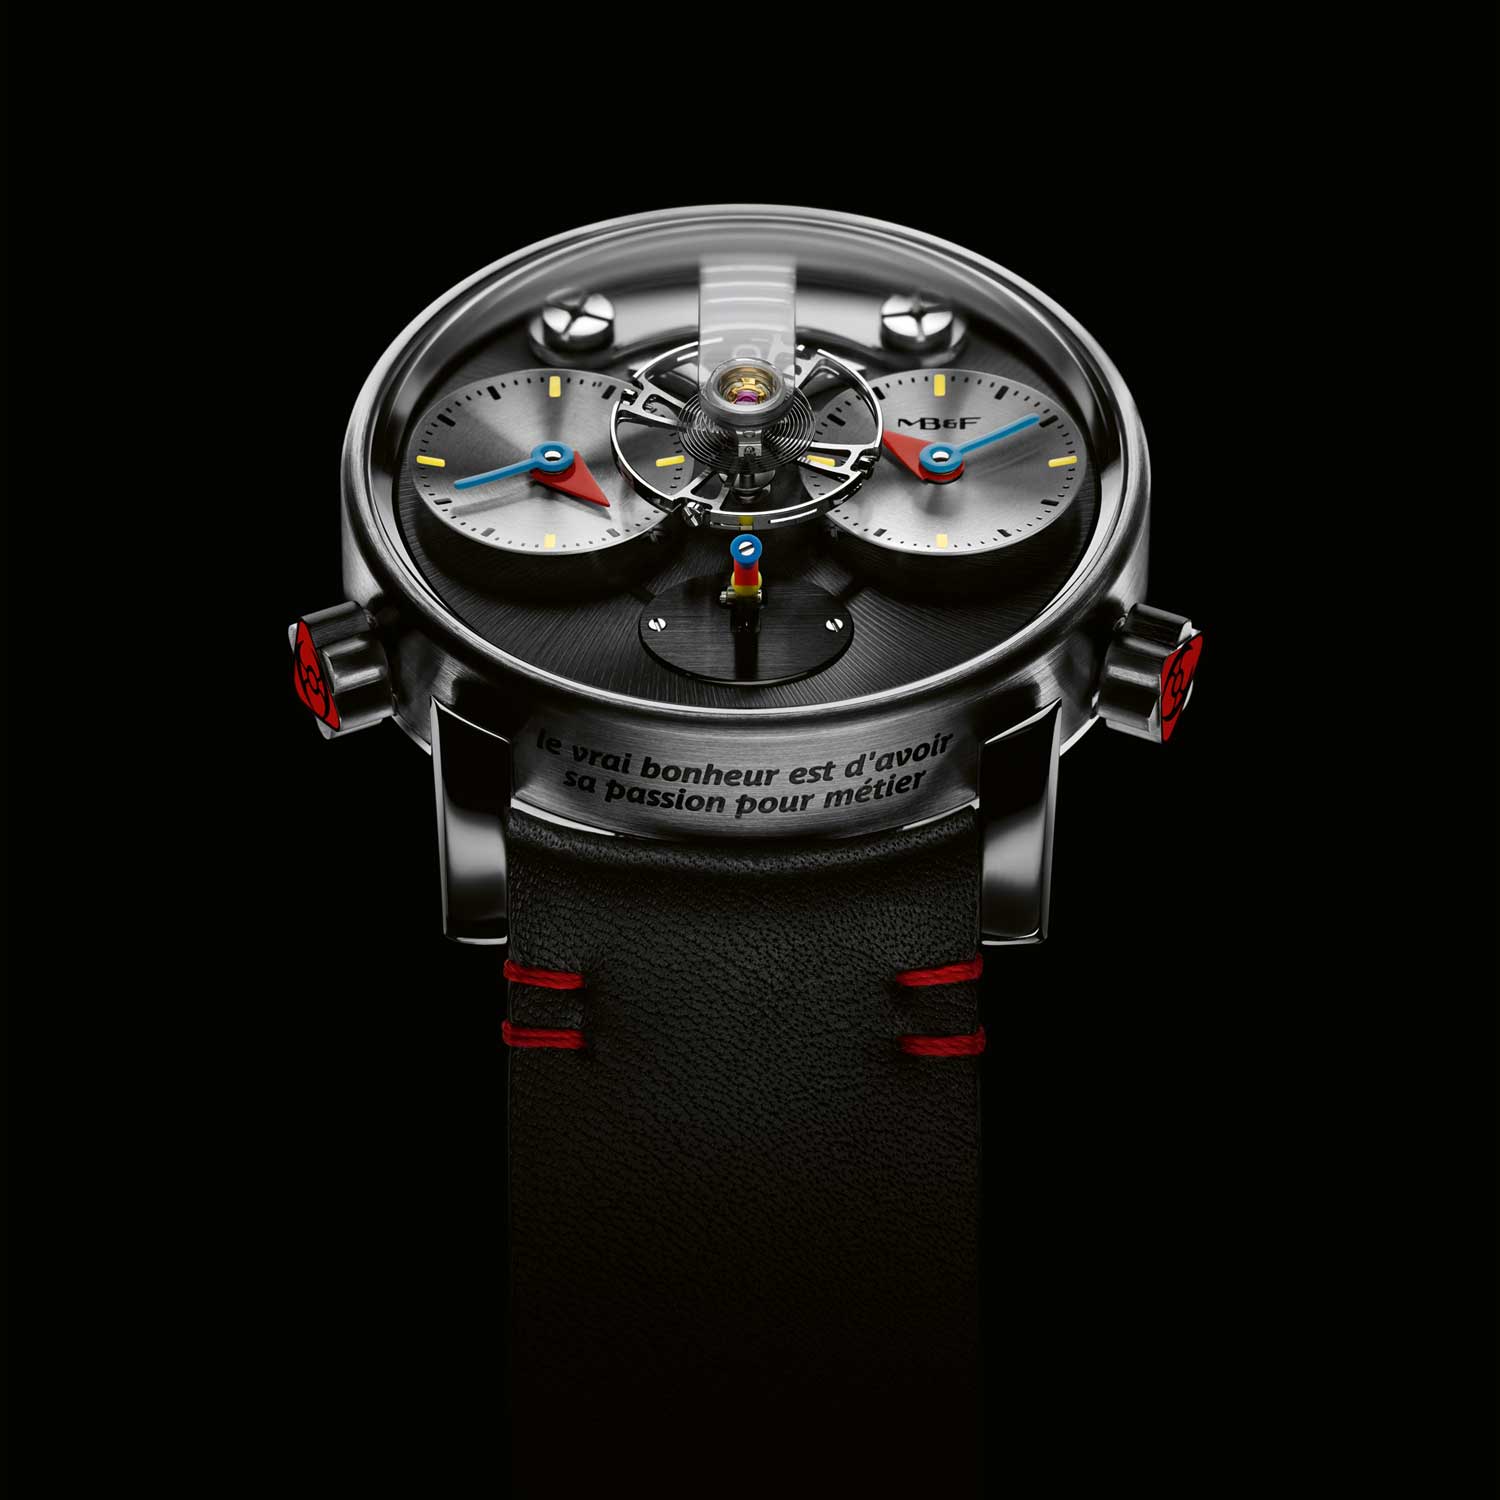 The LM1 Silberstein, a limited edition collaboration with Alain Silberstein